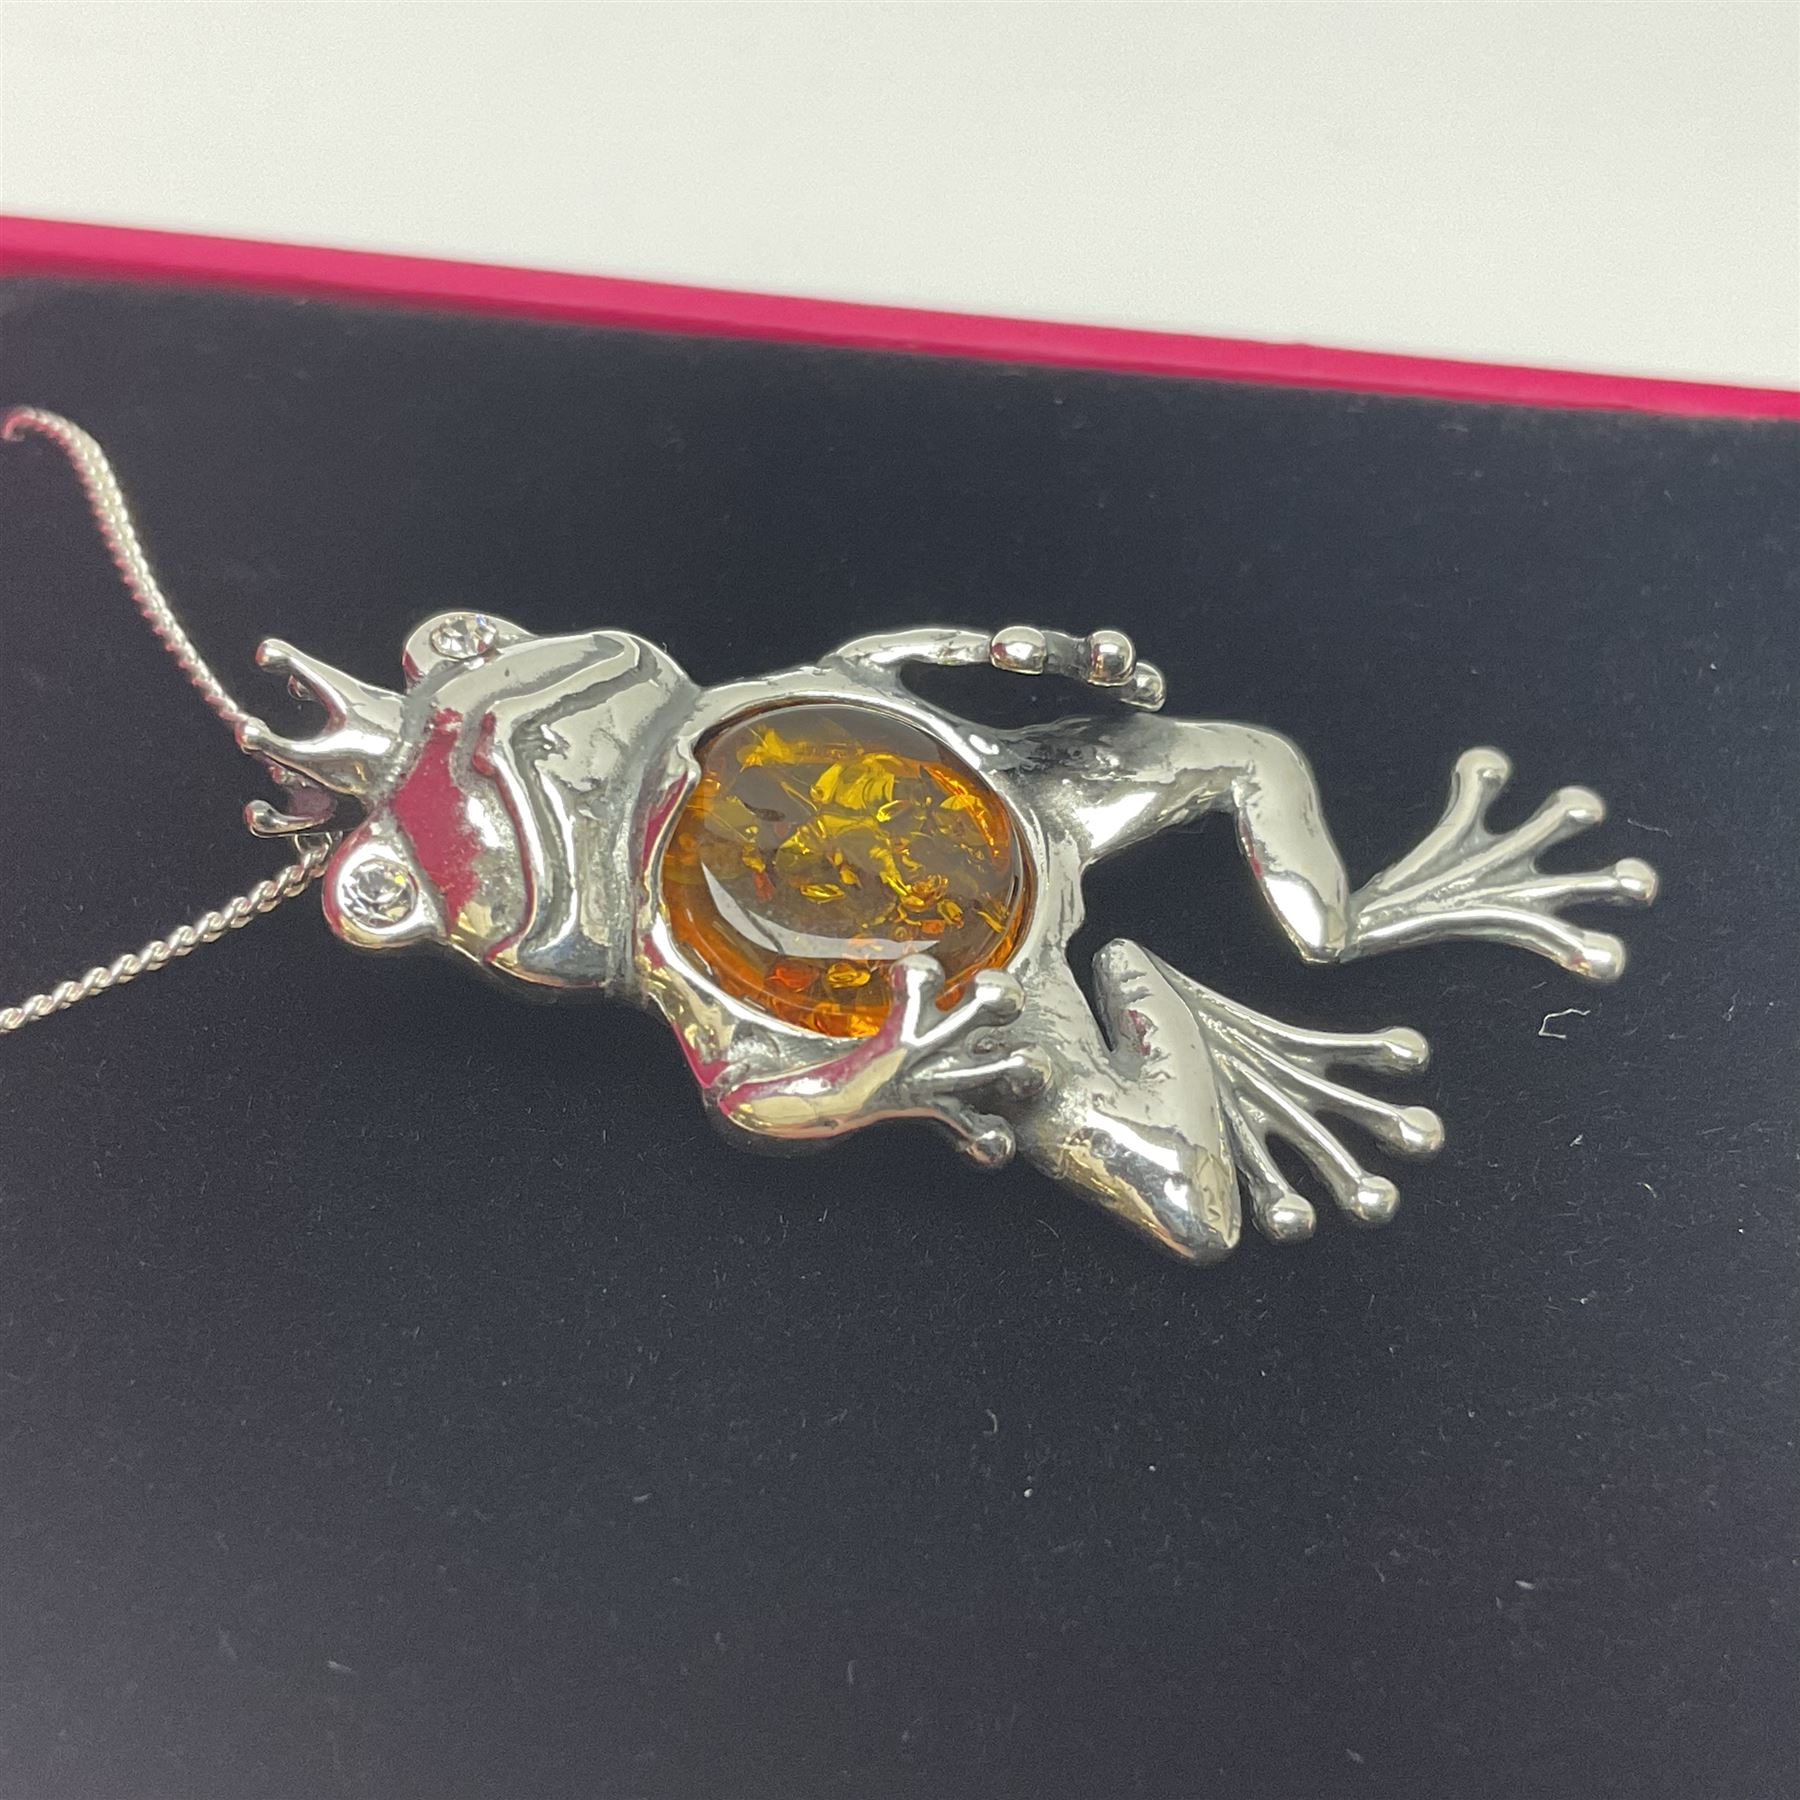 Silver Baltic amber frog prince pendant necklace - Image 3 of 5